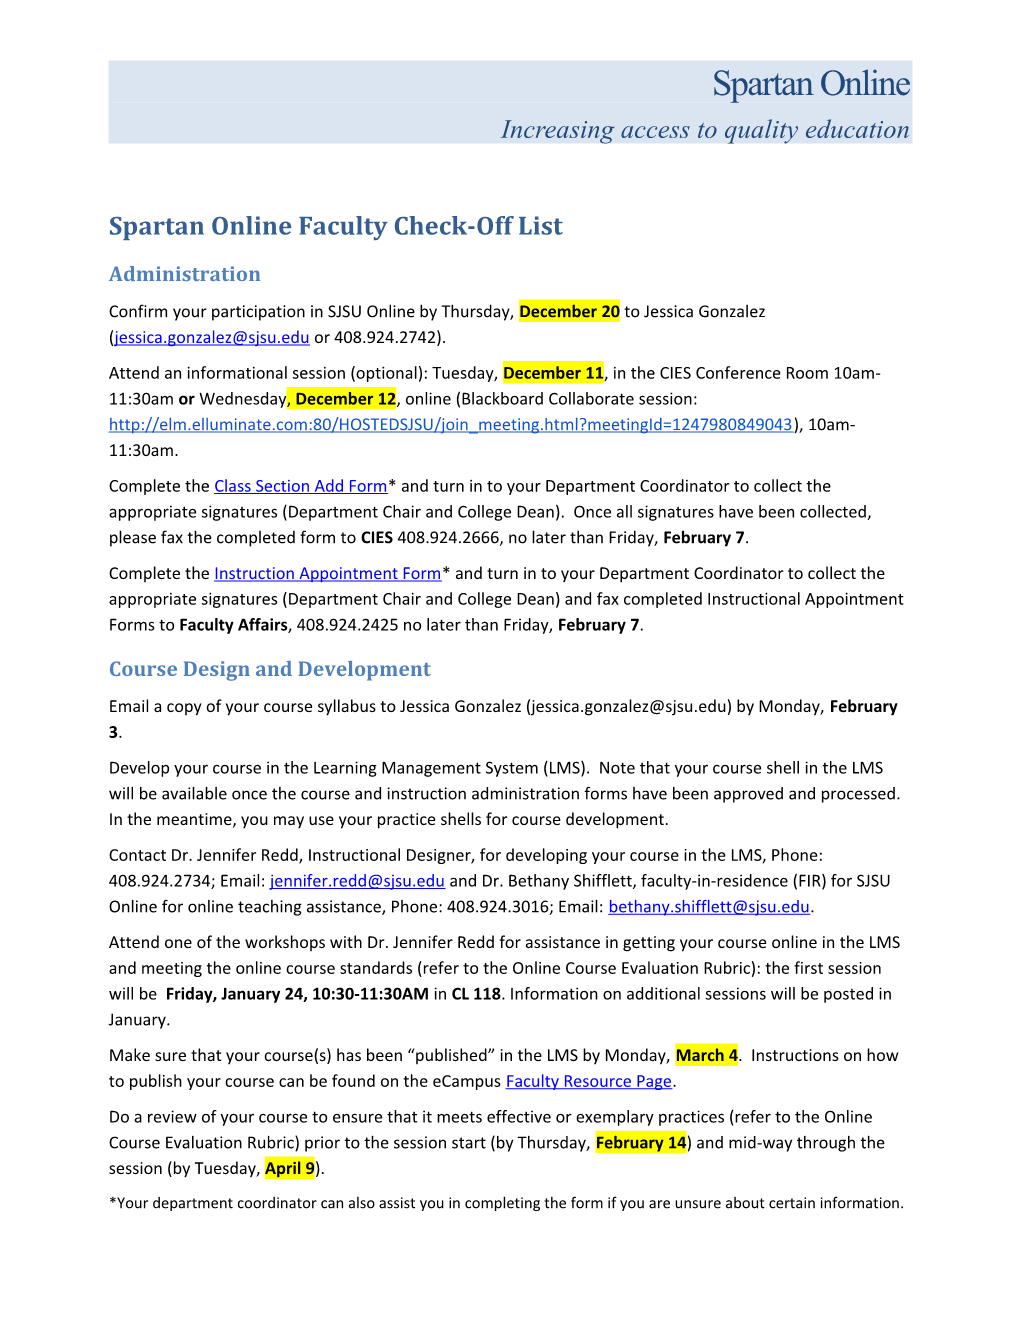 Spartan Online Faculty Check-Off List